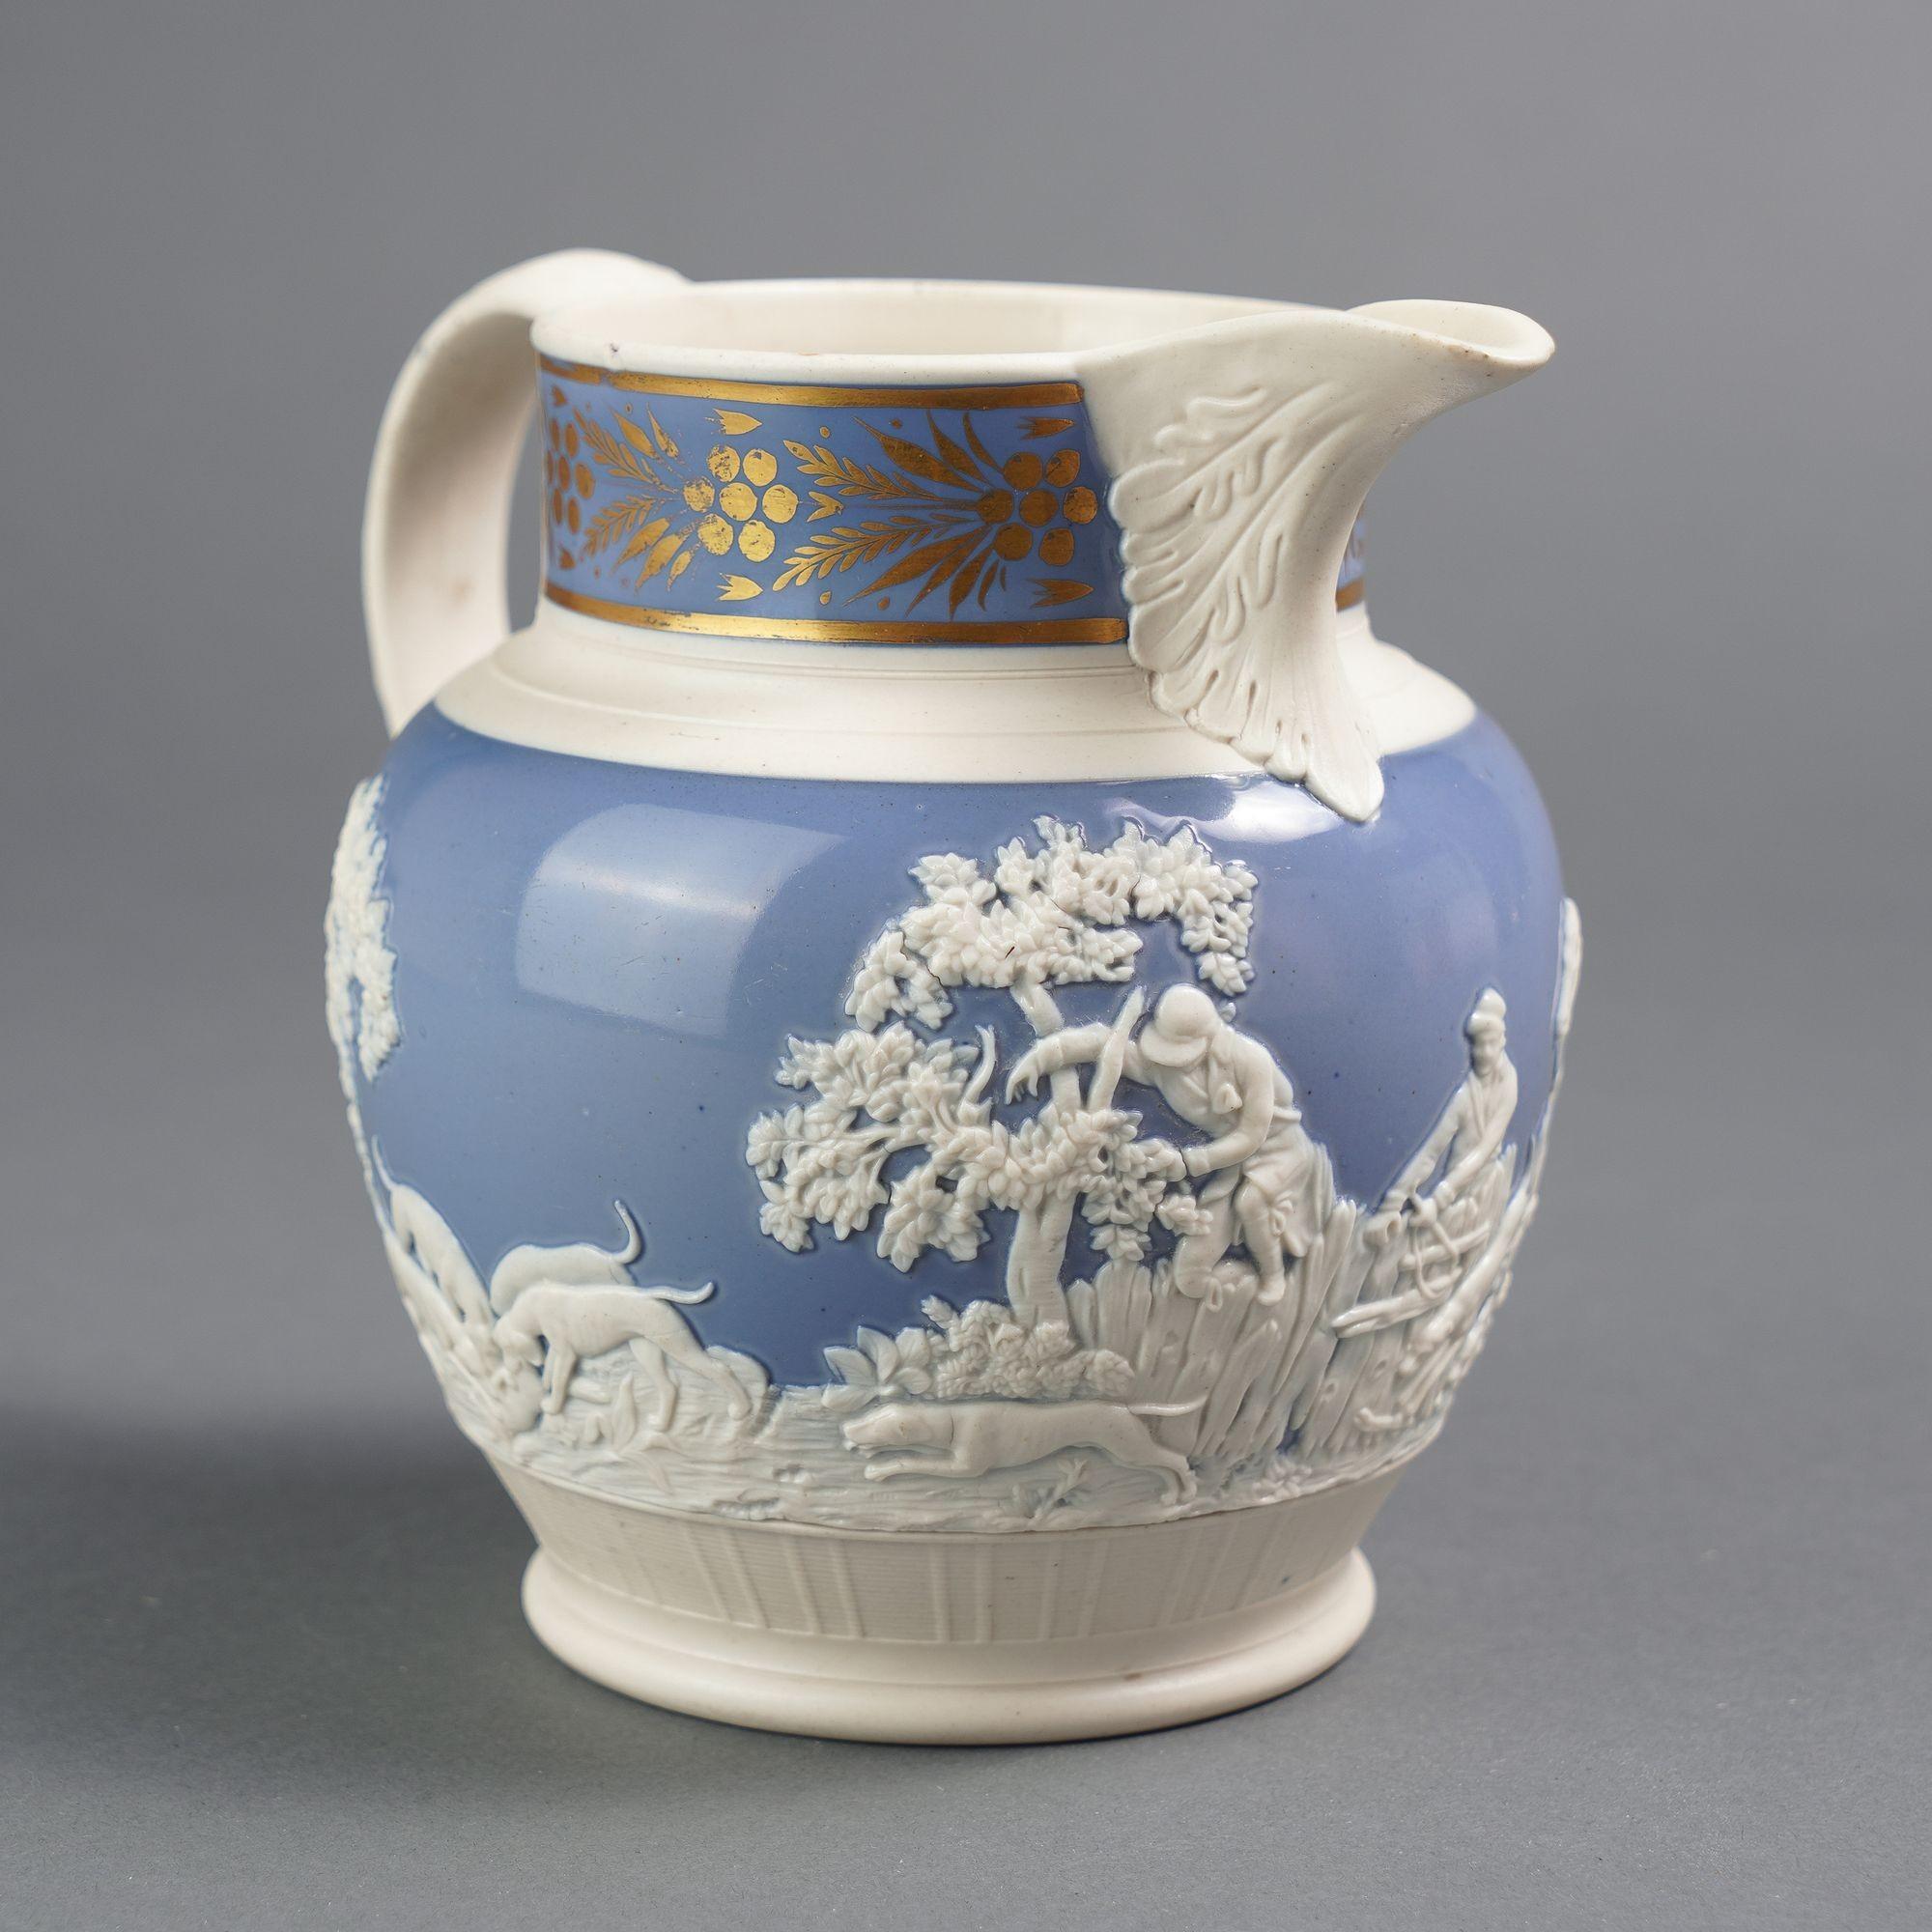 Stoneware English stoneware hunt jug by Chetham & Woolley, c. 1793-1821 For Sale